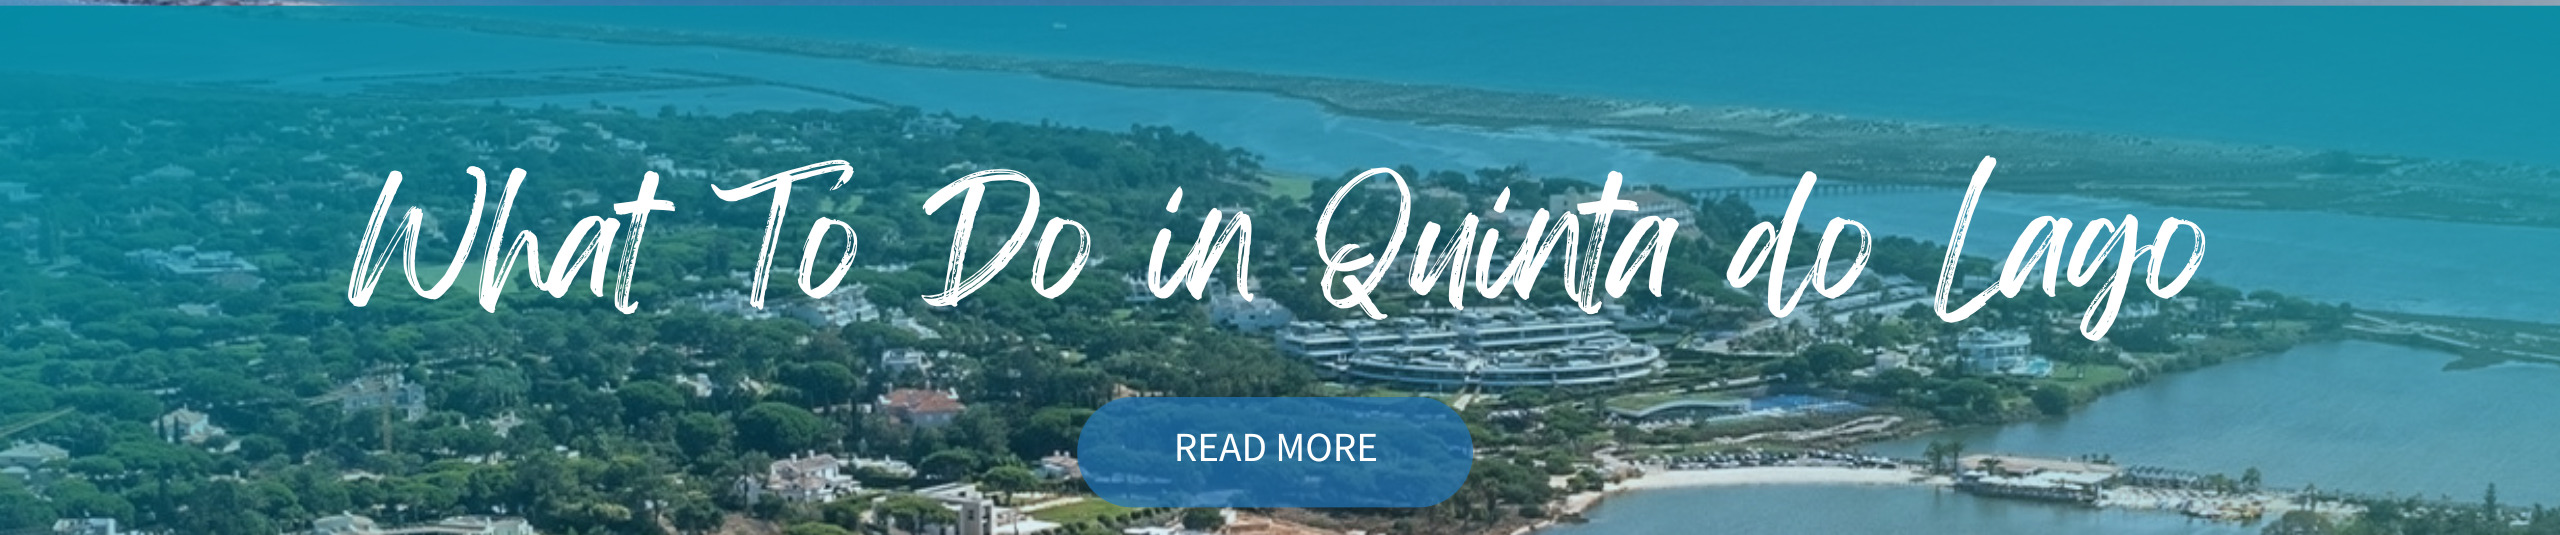 What to do in Quinta do Lago CTA blog web banner